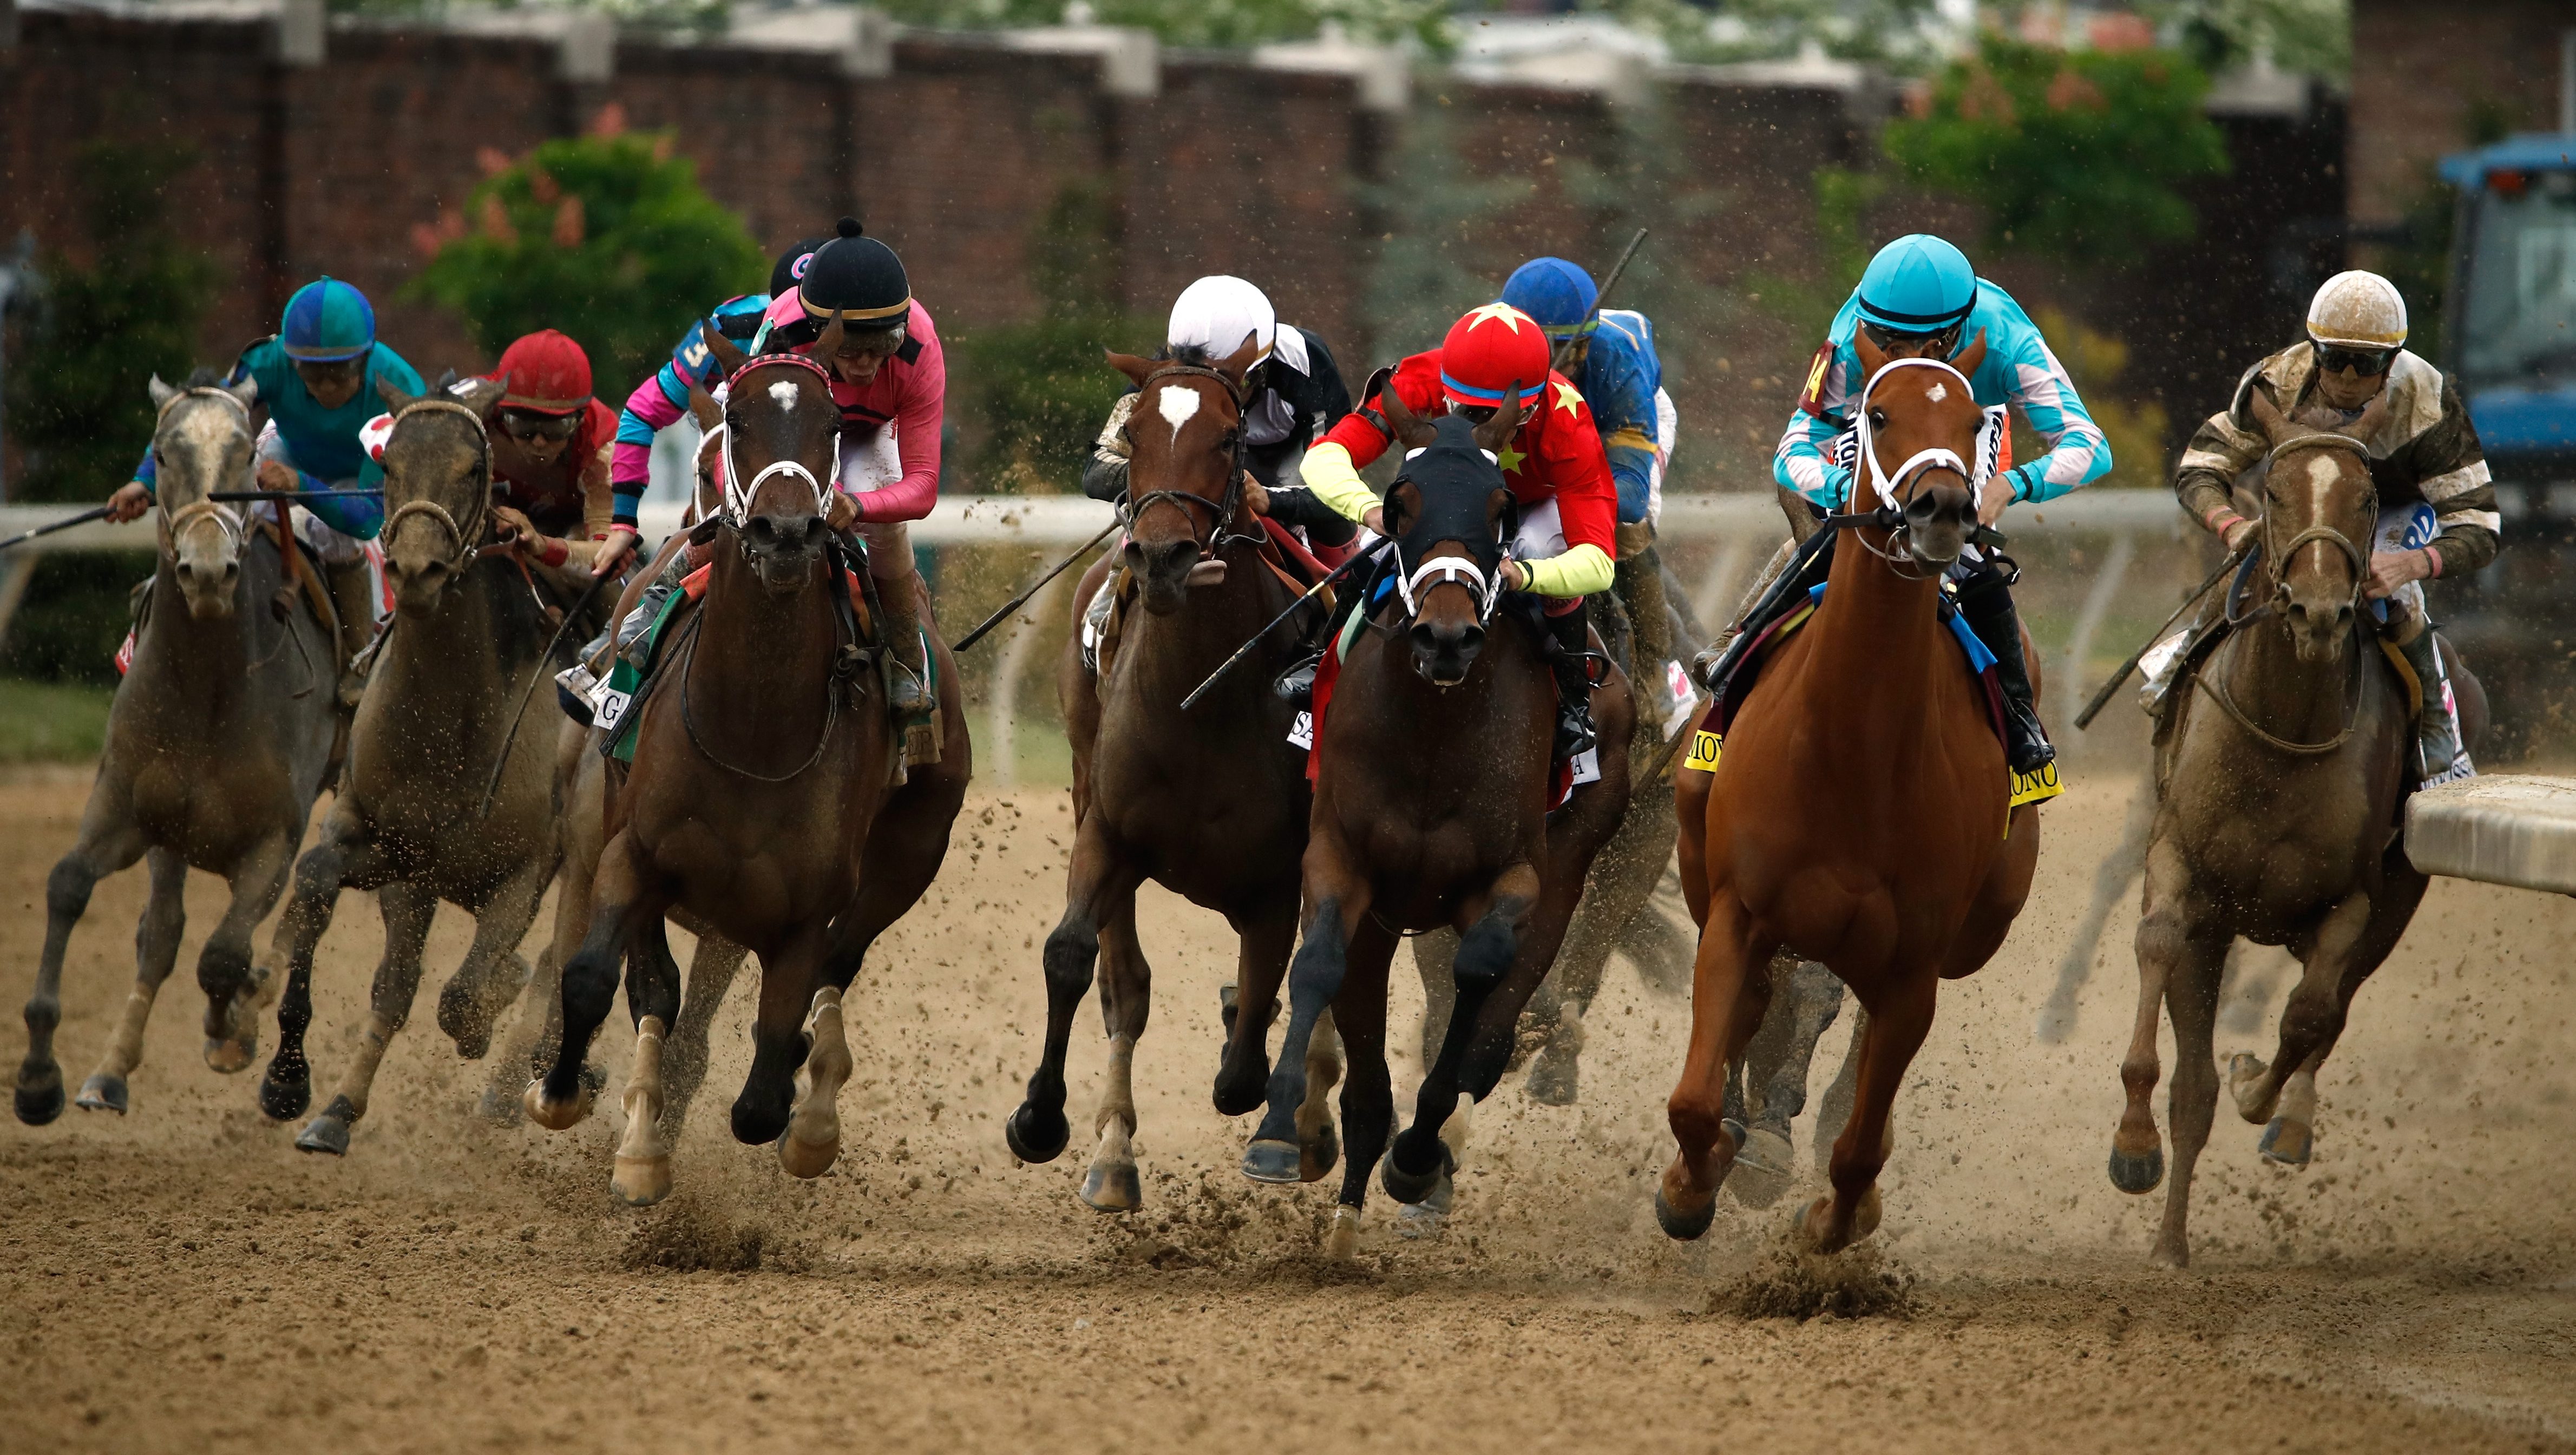 Kentucky Oaks Live Stream How to Watch Without Cable